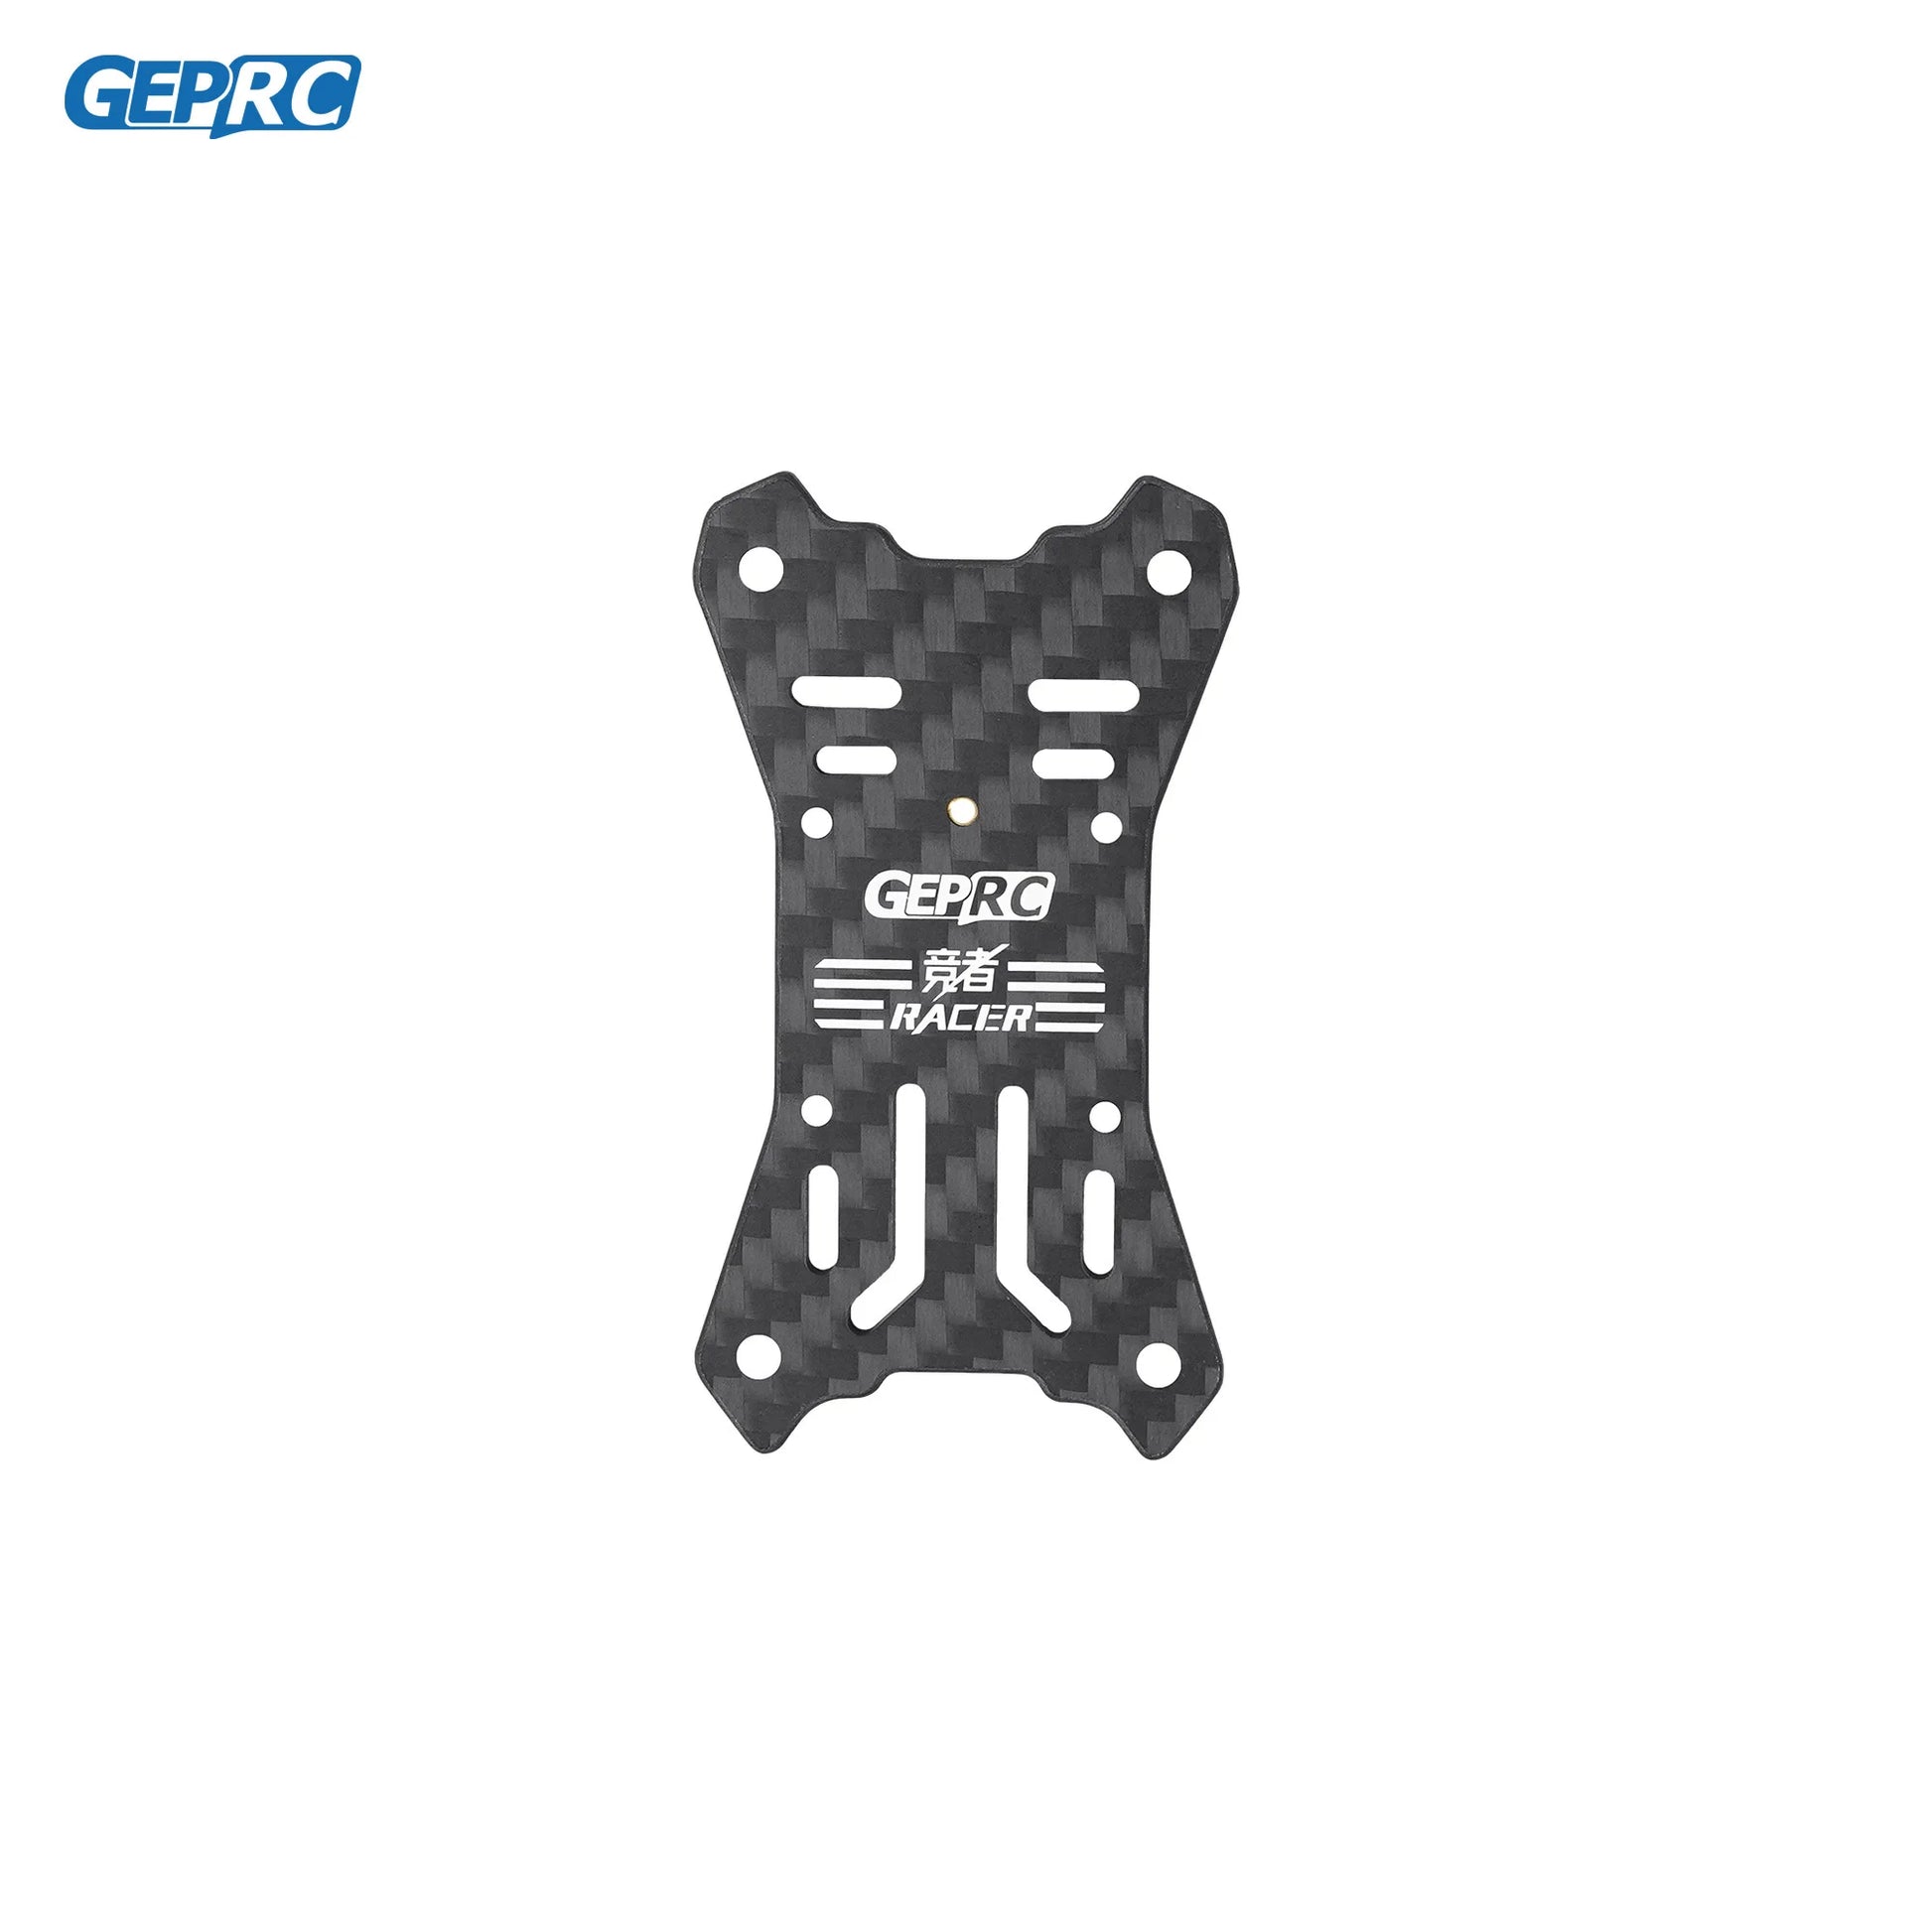 GEPRC GEP-Racer Frame Parts - 5inch Propeller Accessory Screw Quadcopter Frame FPV Freestyle RC Racing Drone Racer